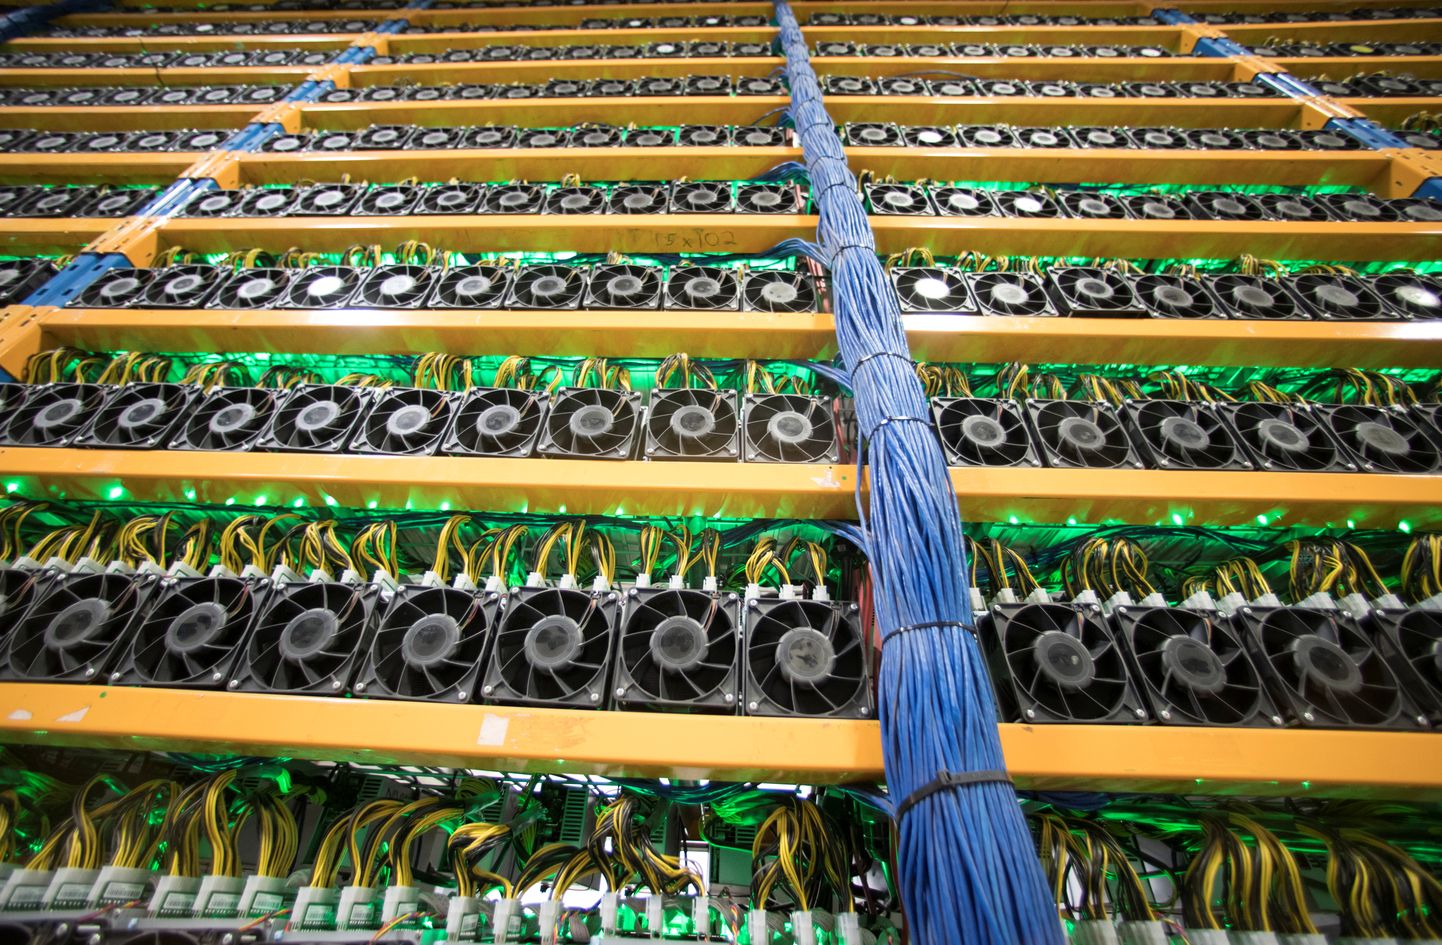 A wall of miners, seen at the cryptocurrency farming operation, Bitfarms, in Farnham, Quebec, Canada, February 2, 2018. Picture taken February 2, 2018. REUTERS/Christinne Muschi